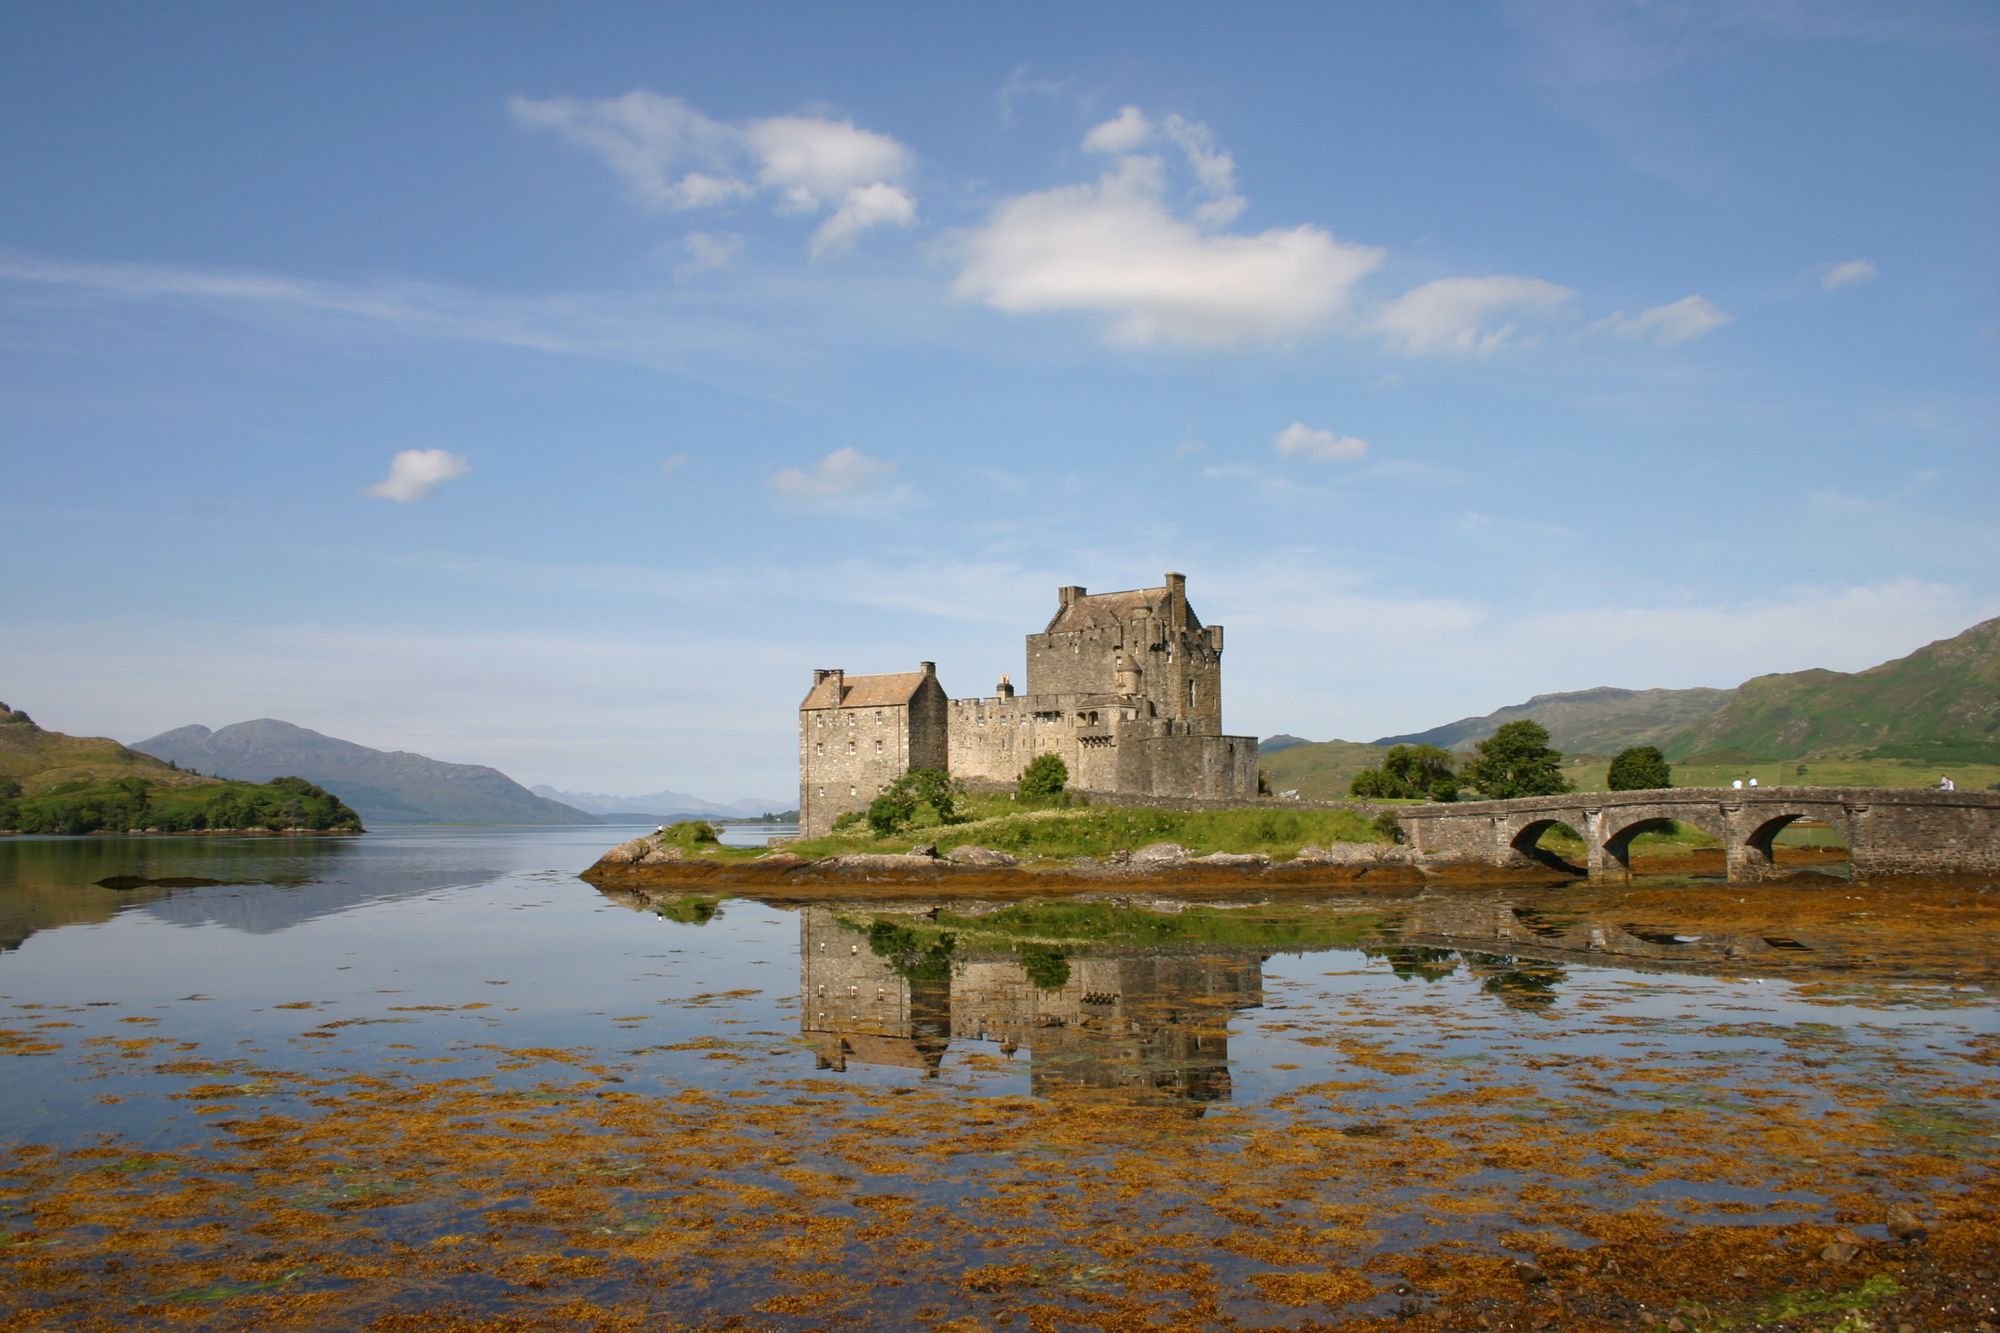 Hotels, Cottages, B&Bs & Glamping in Scotland